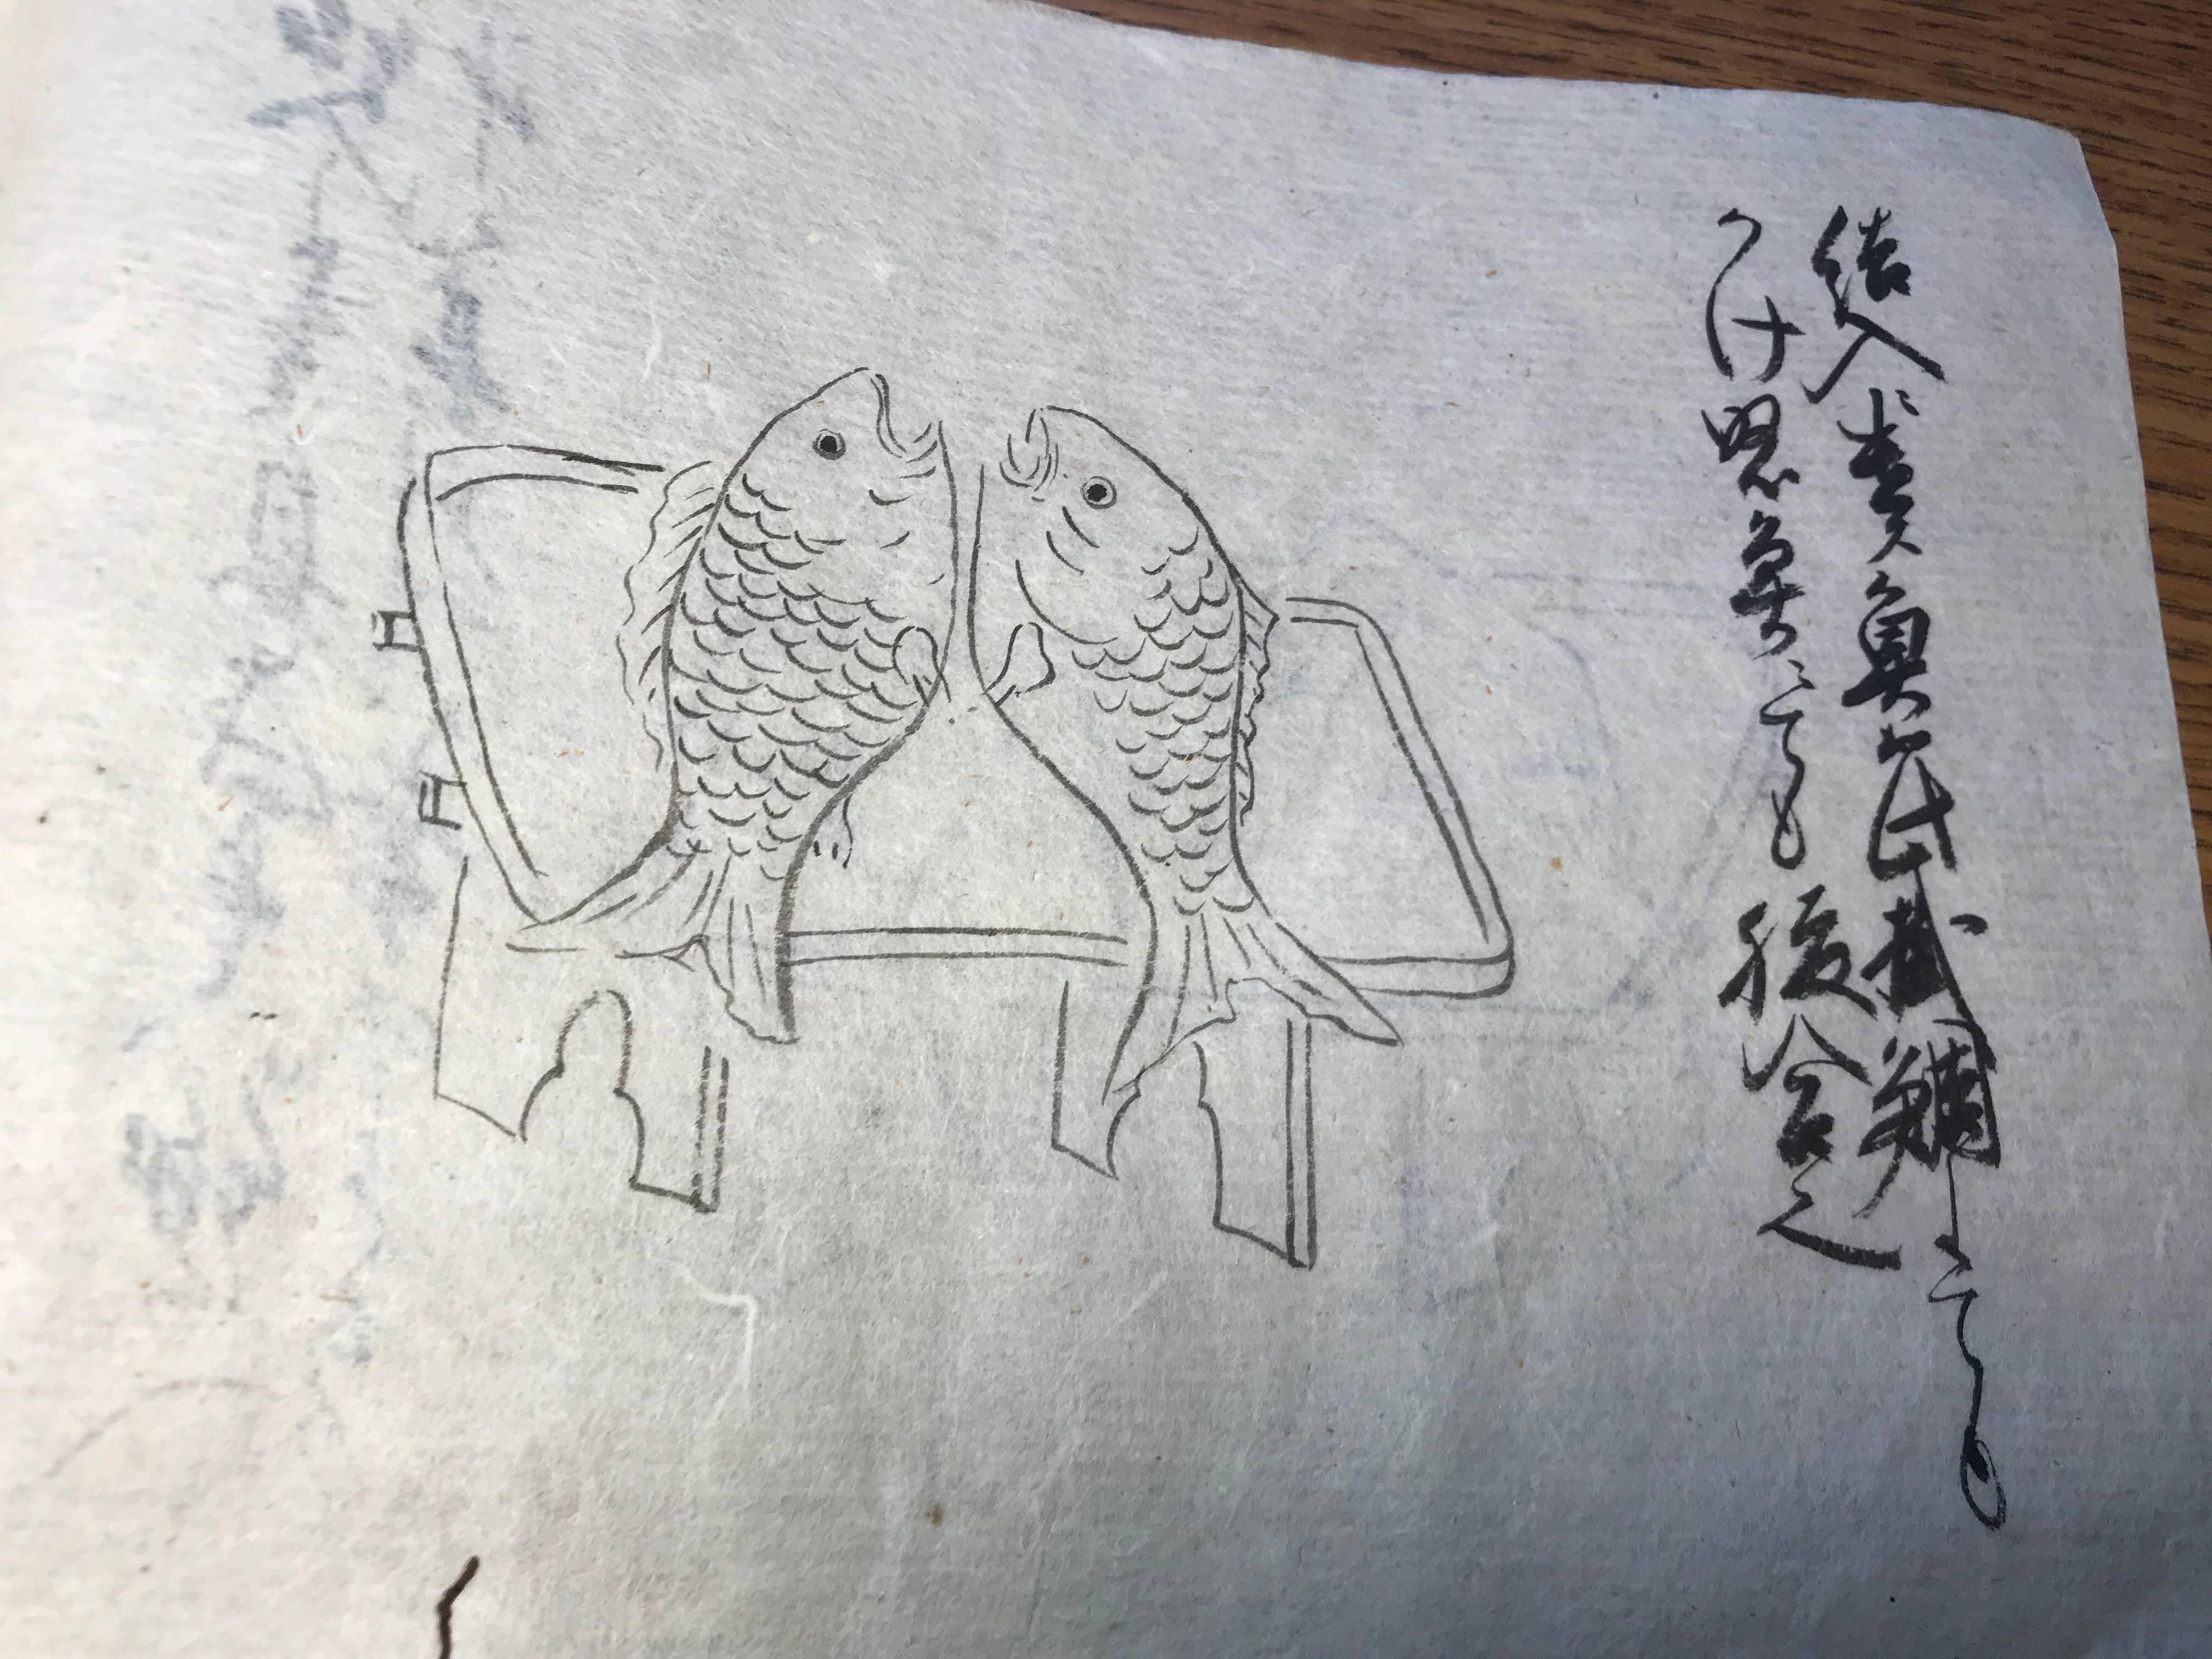 From our most recent Japanese Acquisitions Travels

A rare find. This is an original Japanese 19th century hand-painted- manuscript volume on Cooking. Includes 56 hand drawn plates of fish, scampi, fowl, vegetables, knives, napkins, even a sake